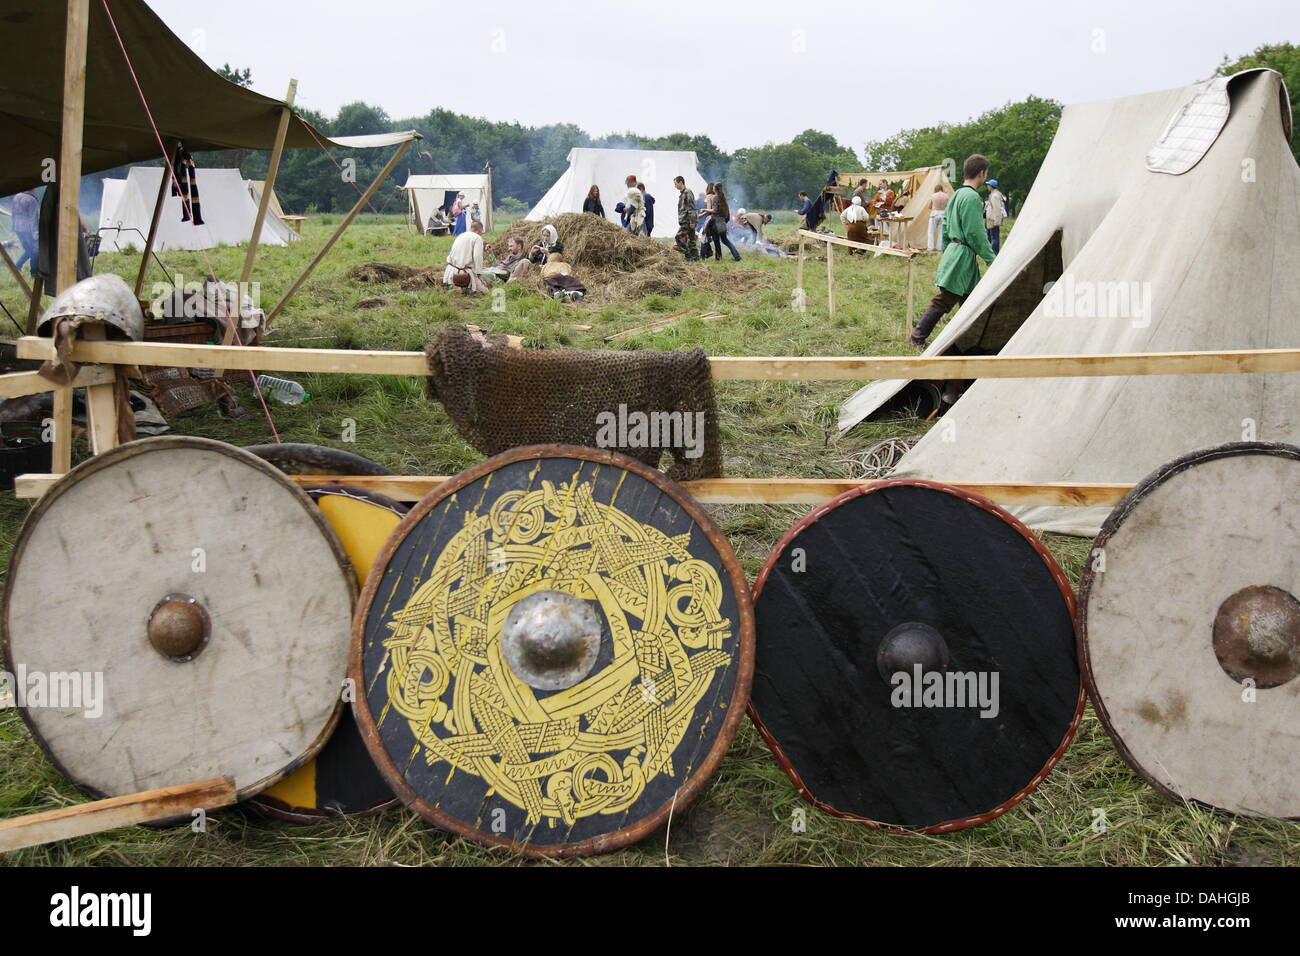 Zelenogradsk, Russia 13th, July 2013 Interational Baltic Nations Festival in Zelenogradsk. Festival  presents culture and day life of nations living in past ages at Baltic Sea coast in Lithuania, Latvia, Prussia and Poland Credit:  Michal Fludra/Alamy Live News Stock Photo